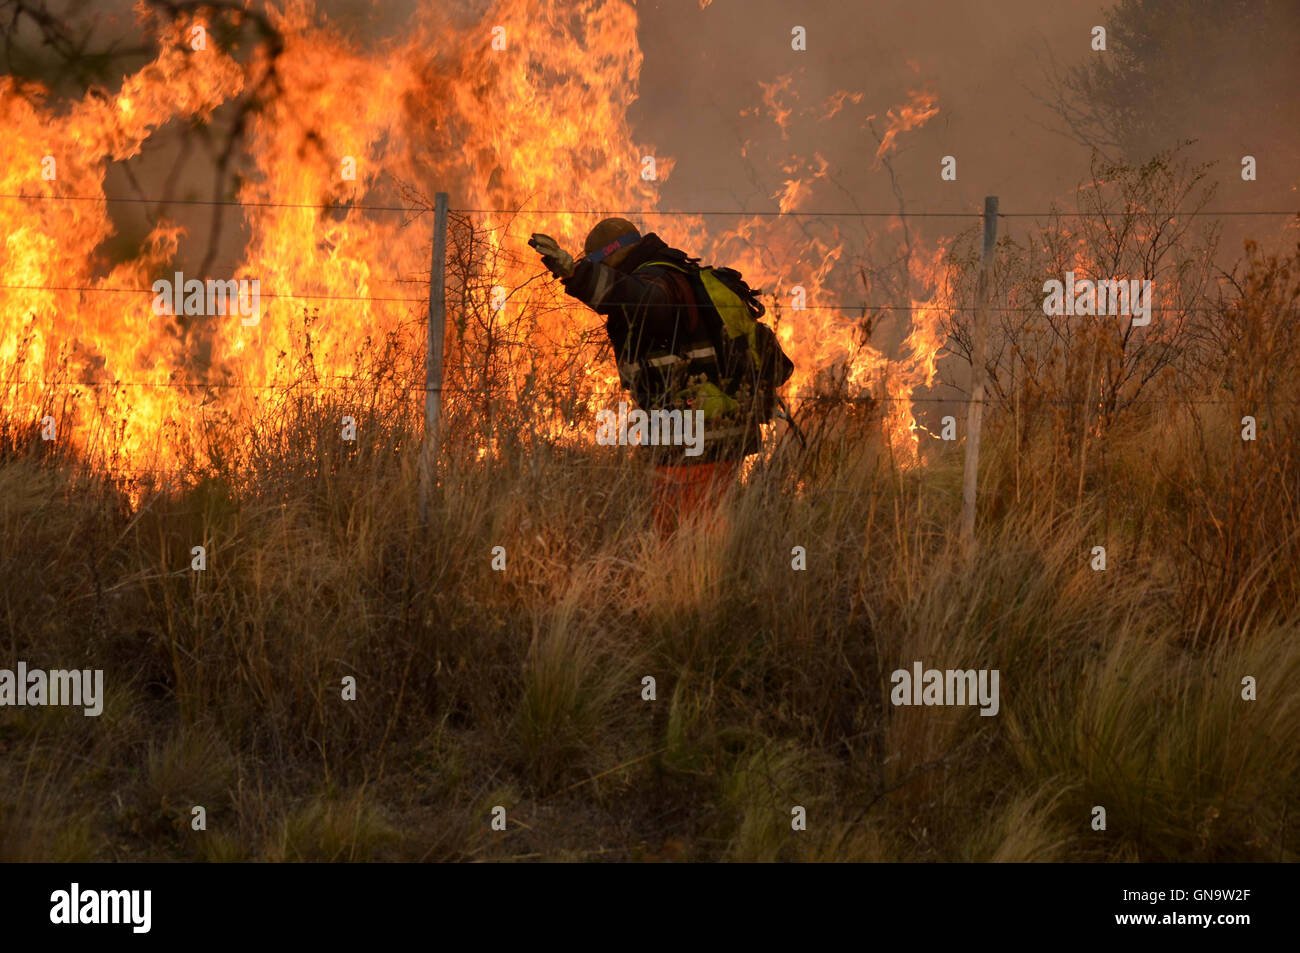 San Luis, Argentina. 28th Aug, 2016. A firefighter tries to extinguish a wildfire in Villa de la Quebrada, 40 km from San Luis, Argentina, on Aug. 28, 2016. The wildfires in central Argentina have affected nearly 8,500 hectares of land, while on Saturday 80 people were evacuated. Credit:  Diario de la Republica de San Luis/TELAM/Xinhua/Alamy Live News Stock Photo